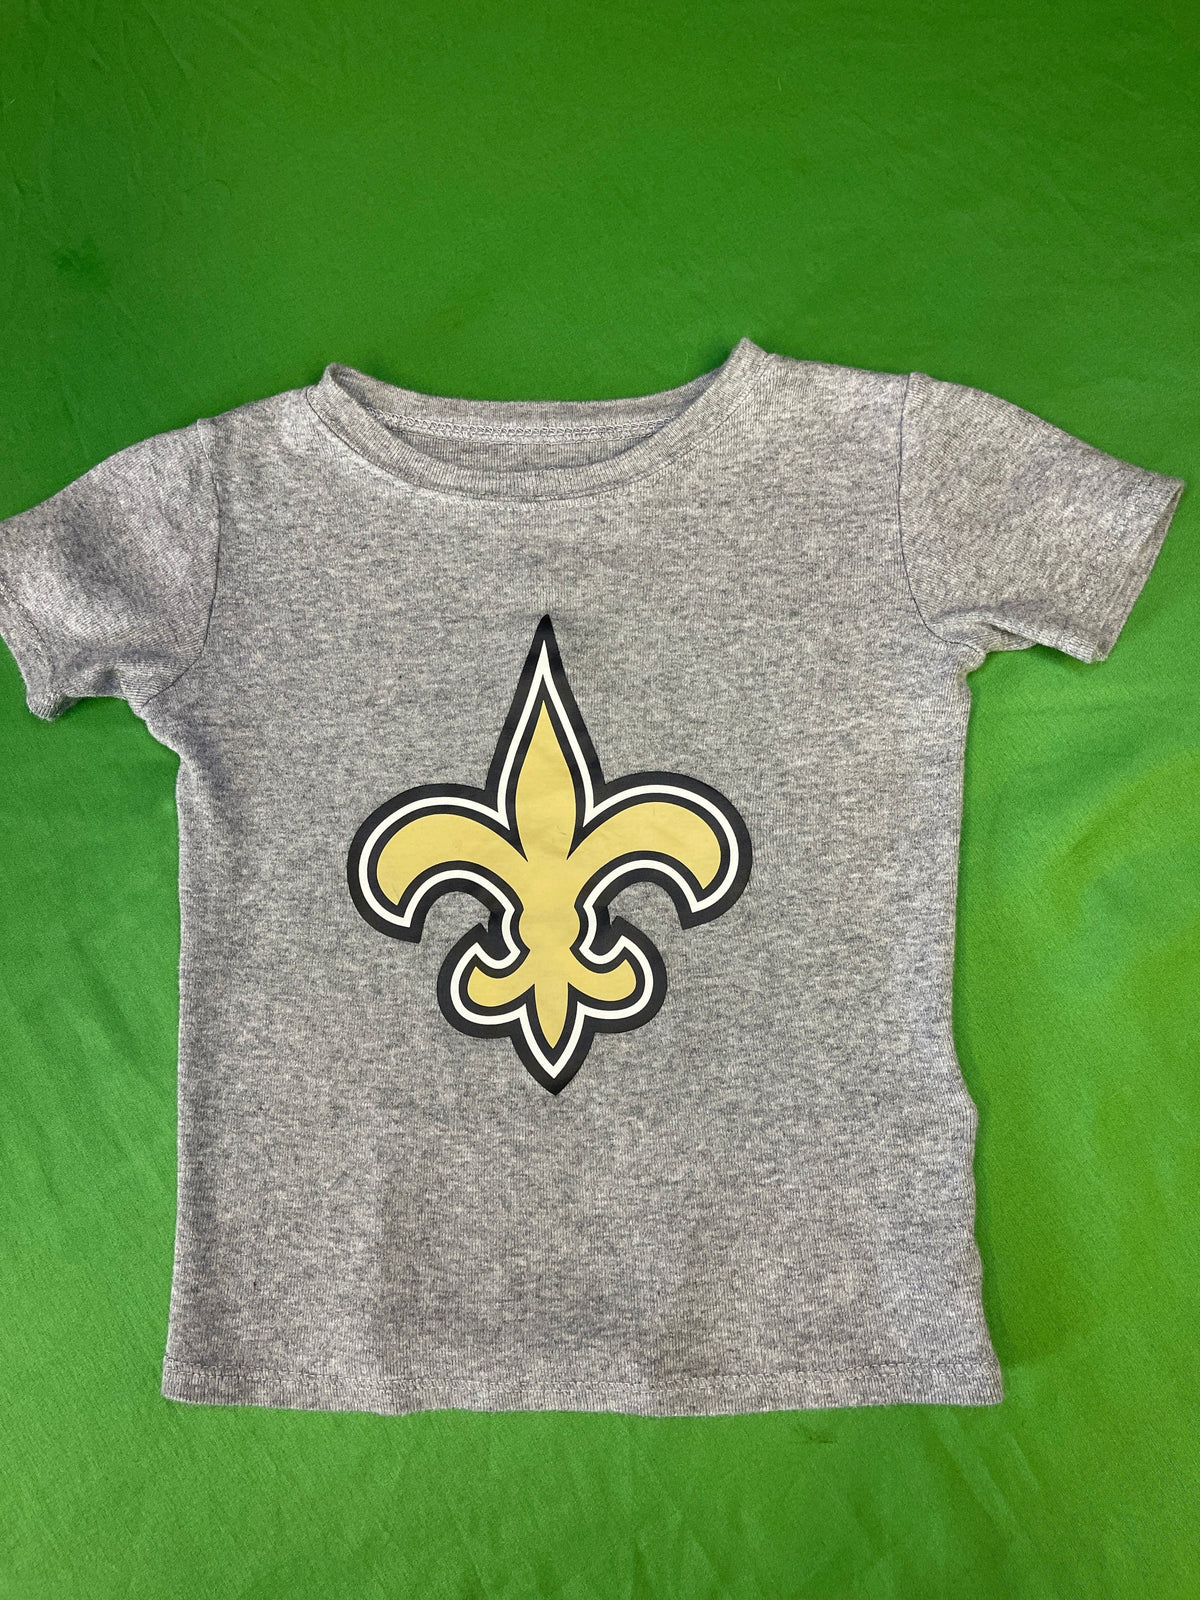 NFL New Orleans Saints Heathered Grey 100% Cotton T-Shirt Toddler 4T